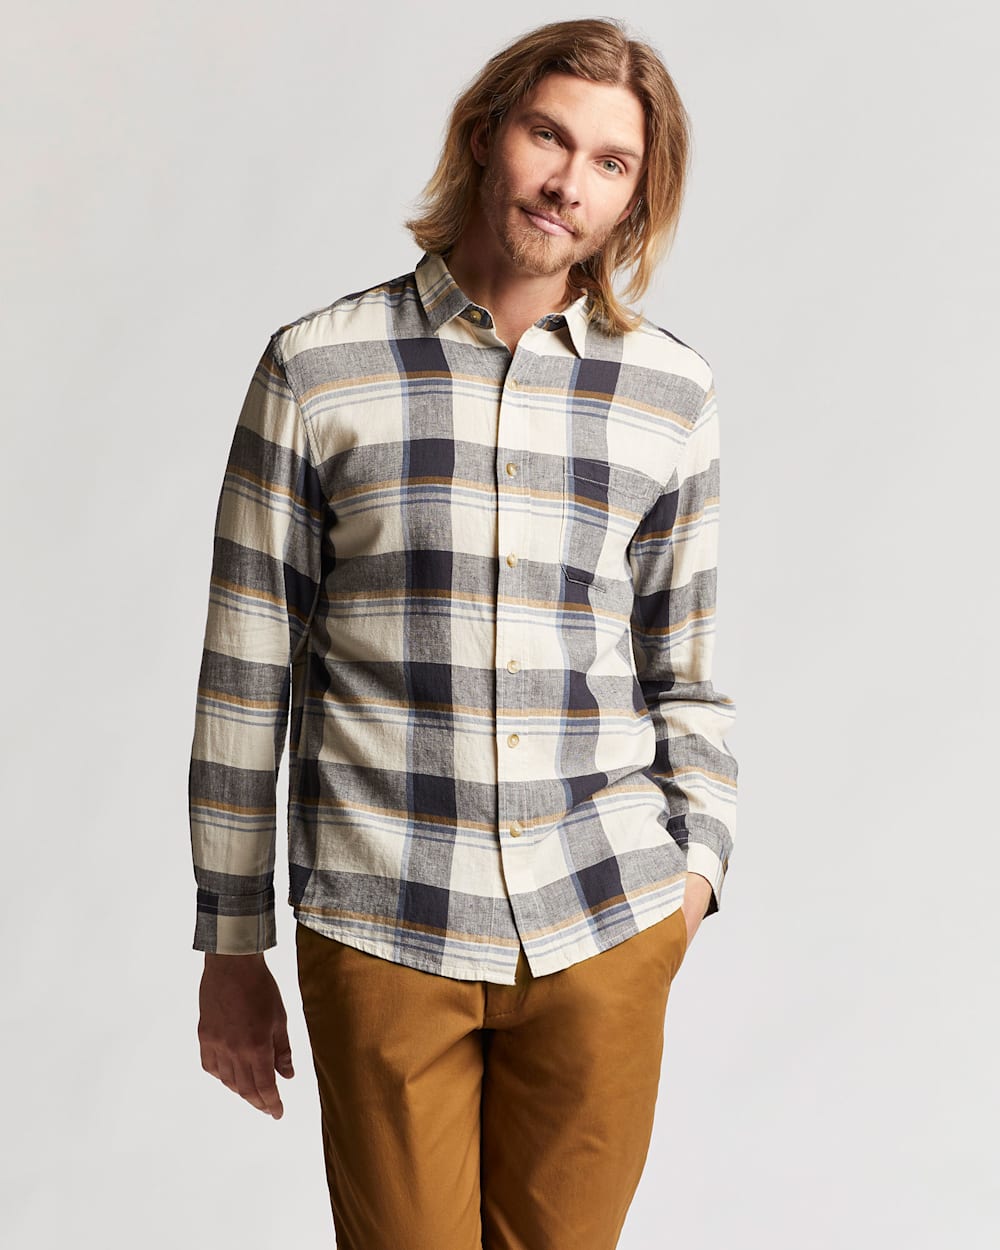 MEN'S LONG-SLEEVE LINEN SHIRT IN GREY/IVORY PLAID image number 1